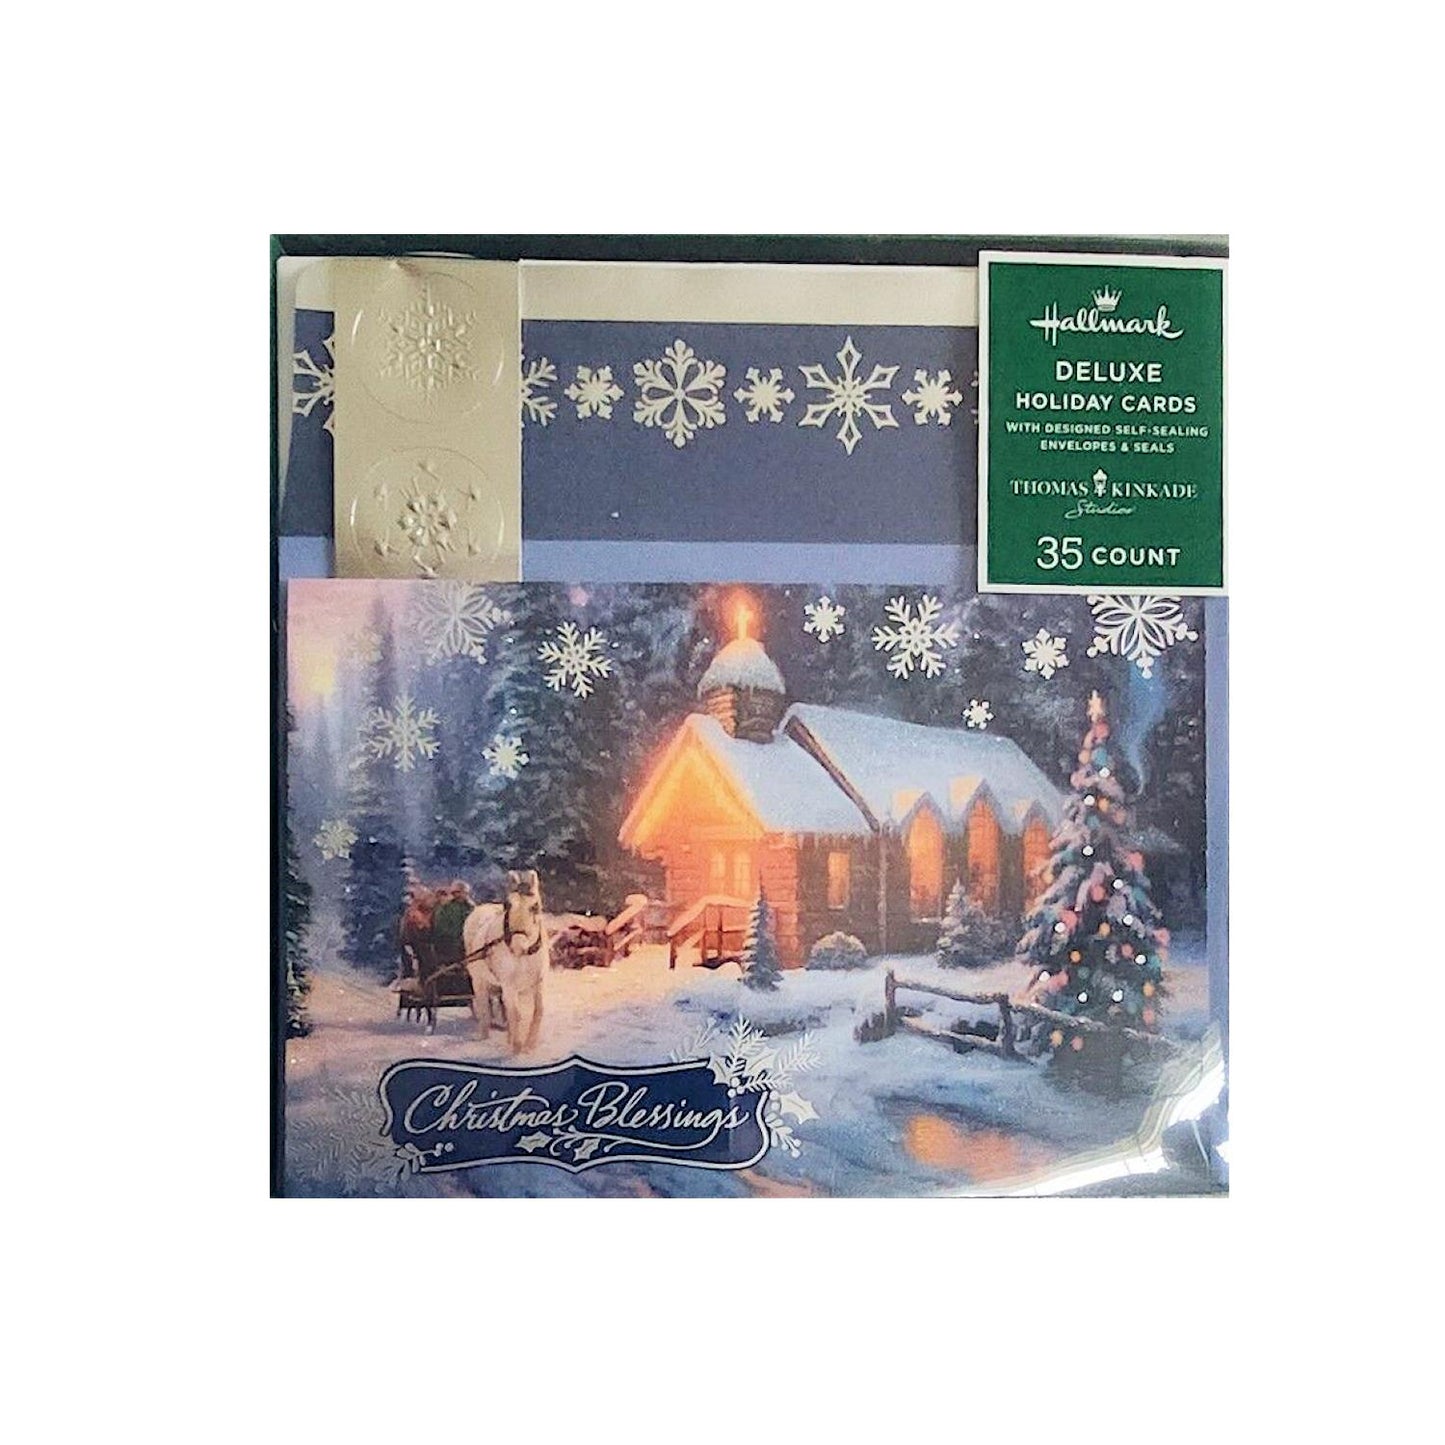 Hallmark Boxed Deluxe Christmas Cards Thomas Kinkade Christmas Blessing Religious 35 Cards, Designed Self-Sealing Envelopes and Seals